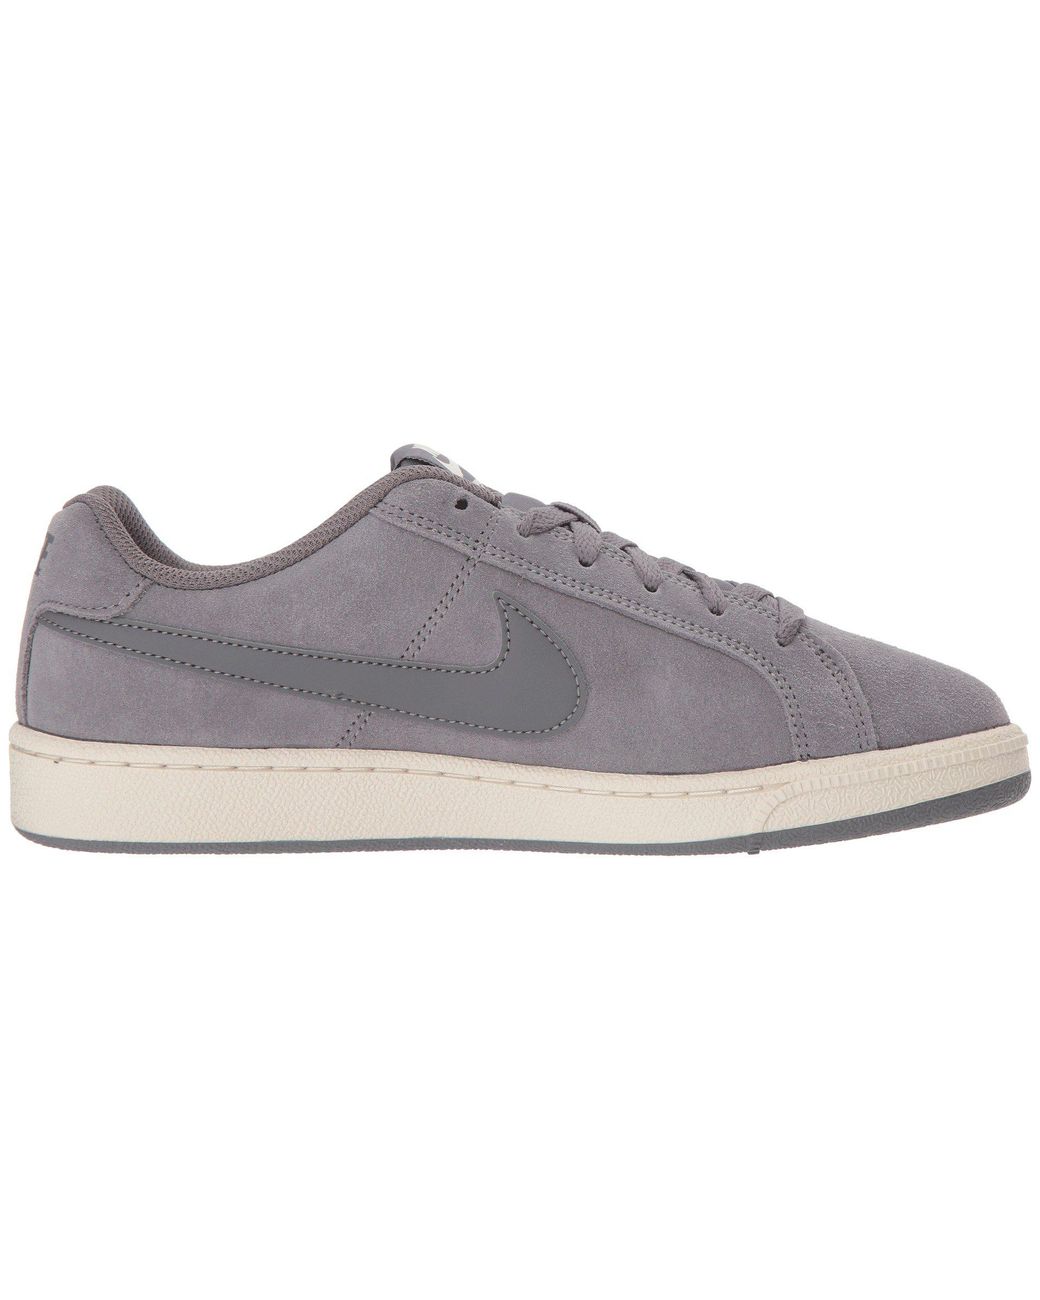 Nike Royale Suede (black/black/thunder Grey) Shoes in Gray | Lyst